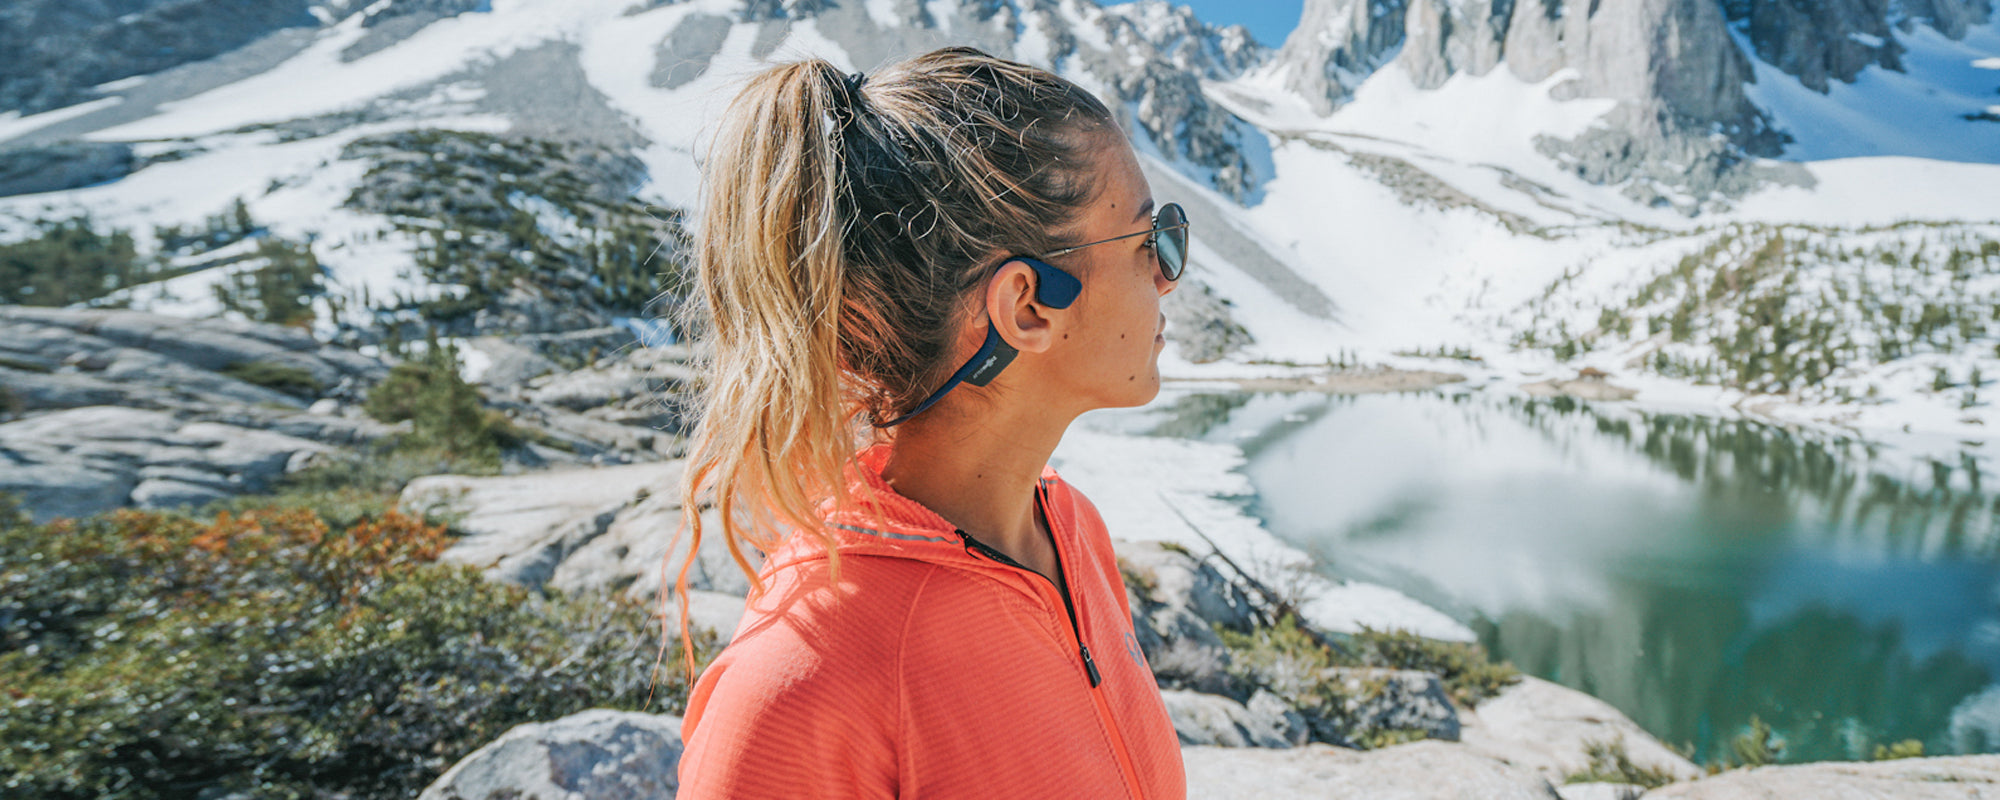 Woman hiking in the mountains while wearing AfterShokz Aeropex wireless headphones